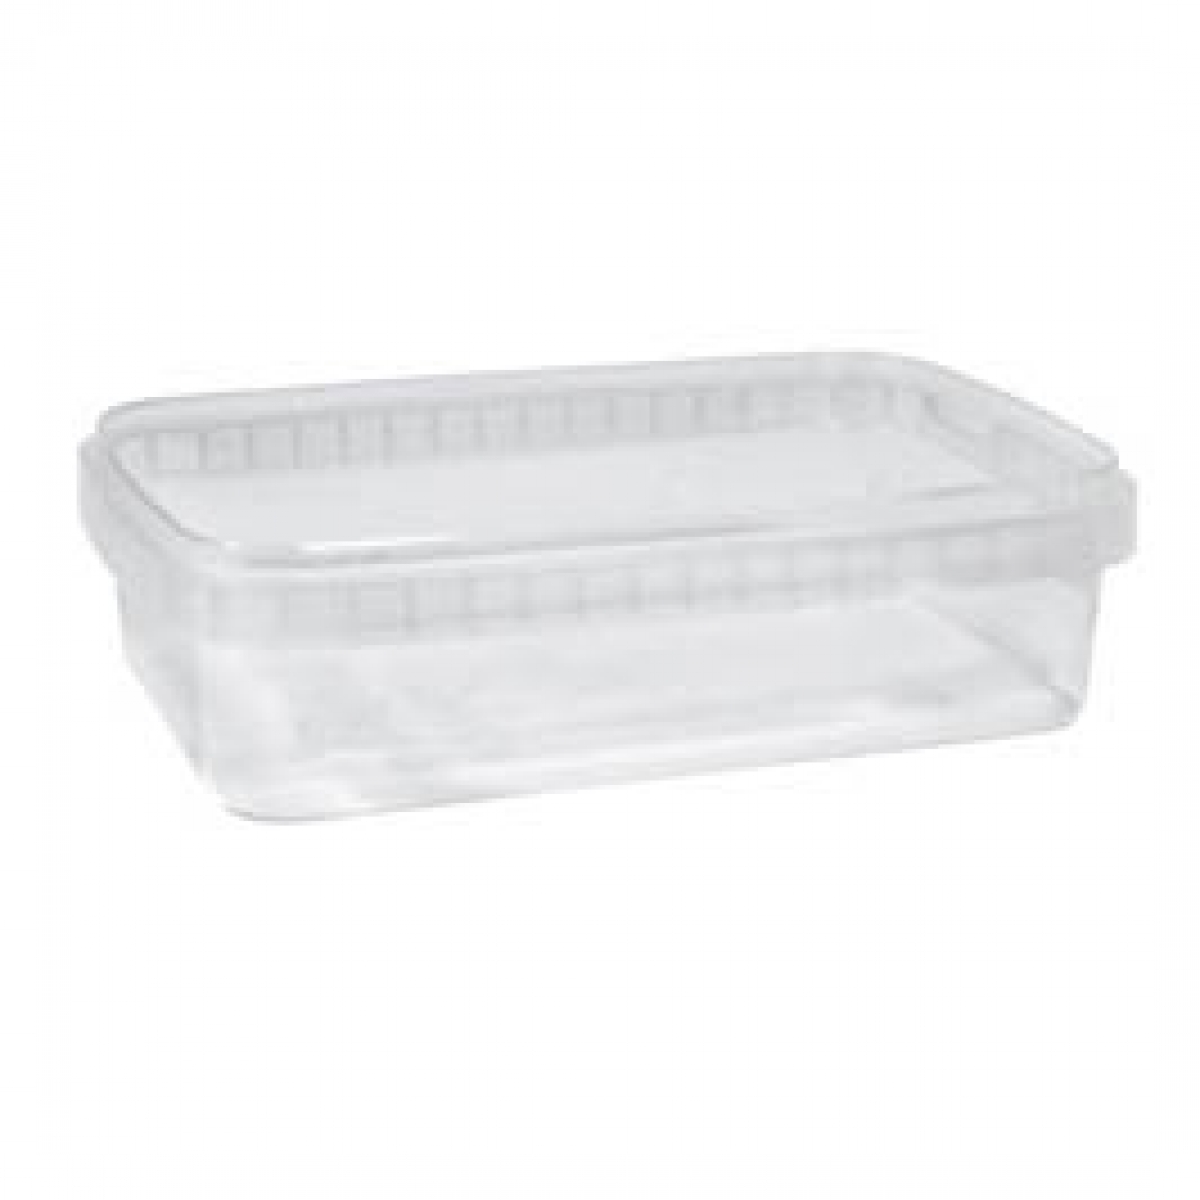 clear bakery container 312*290*70